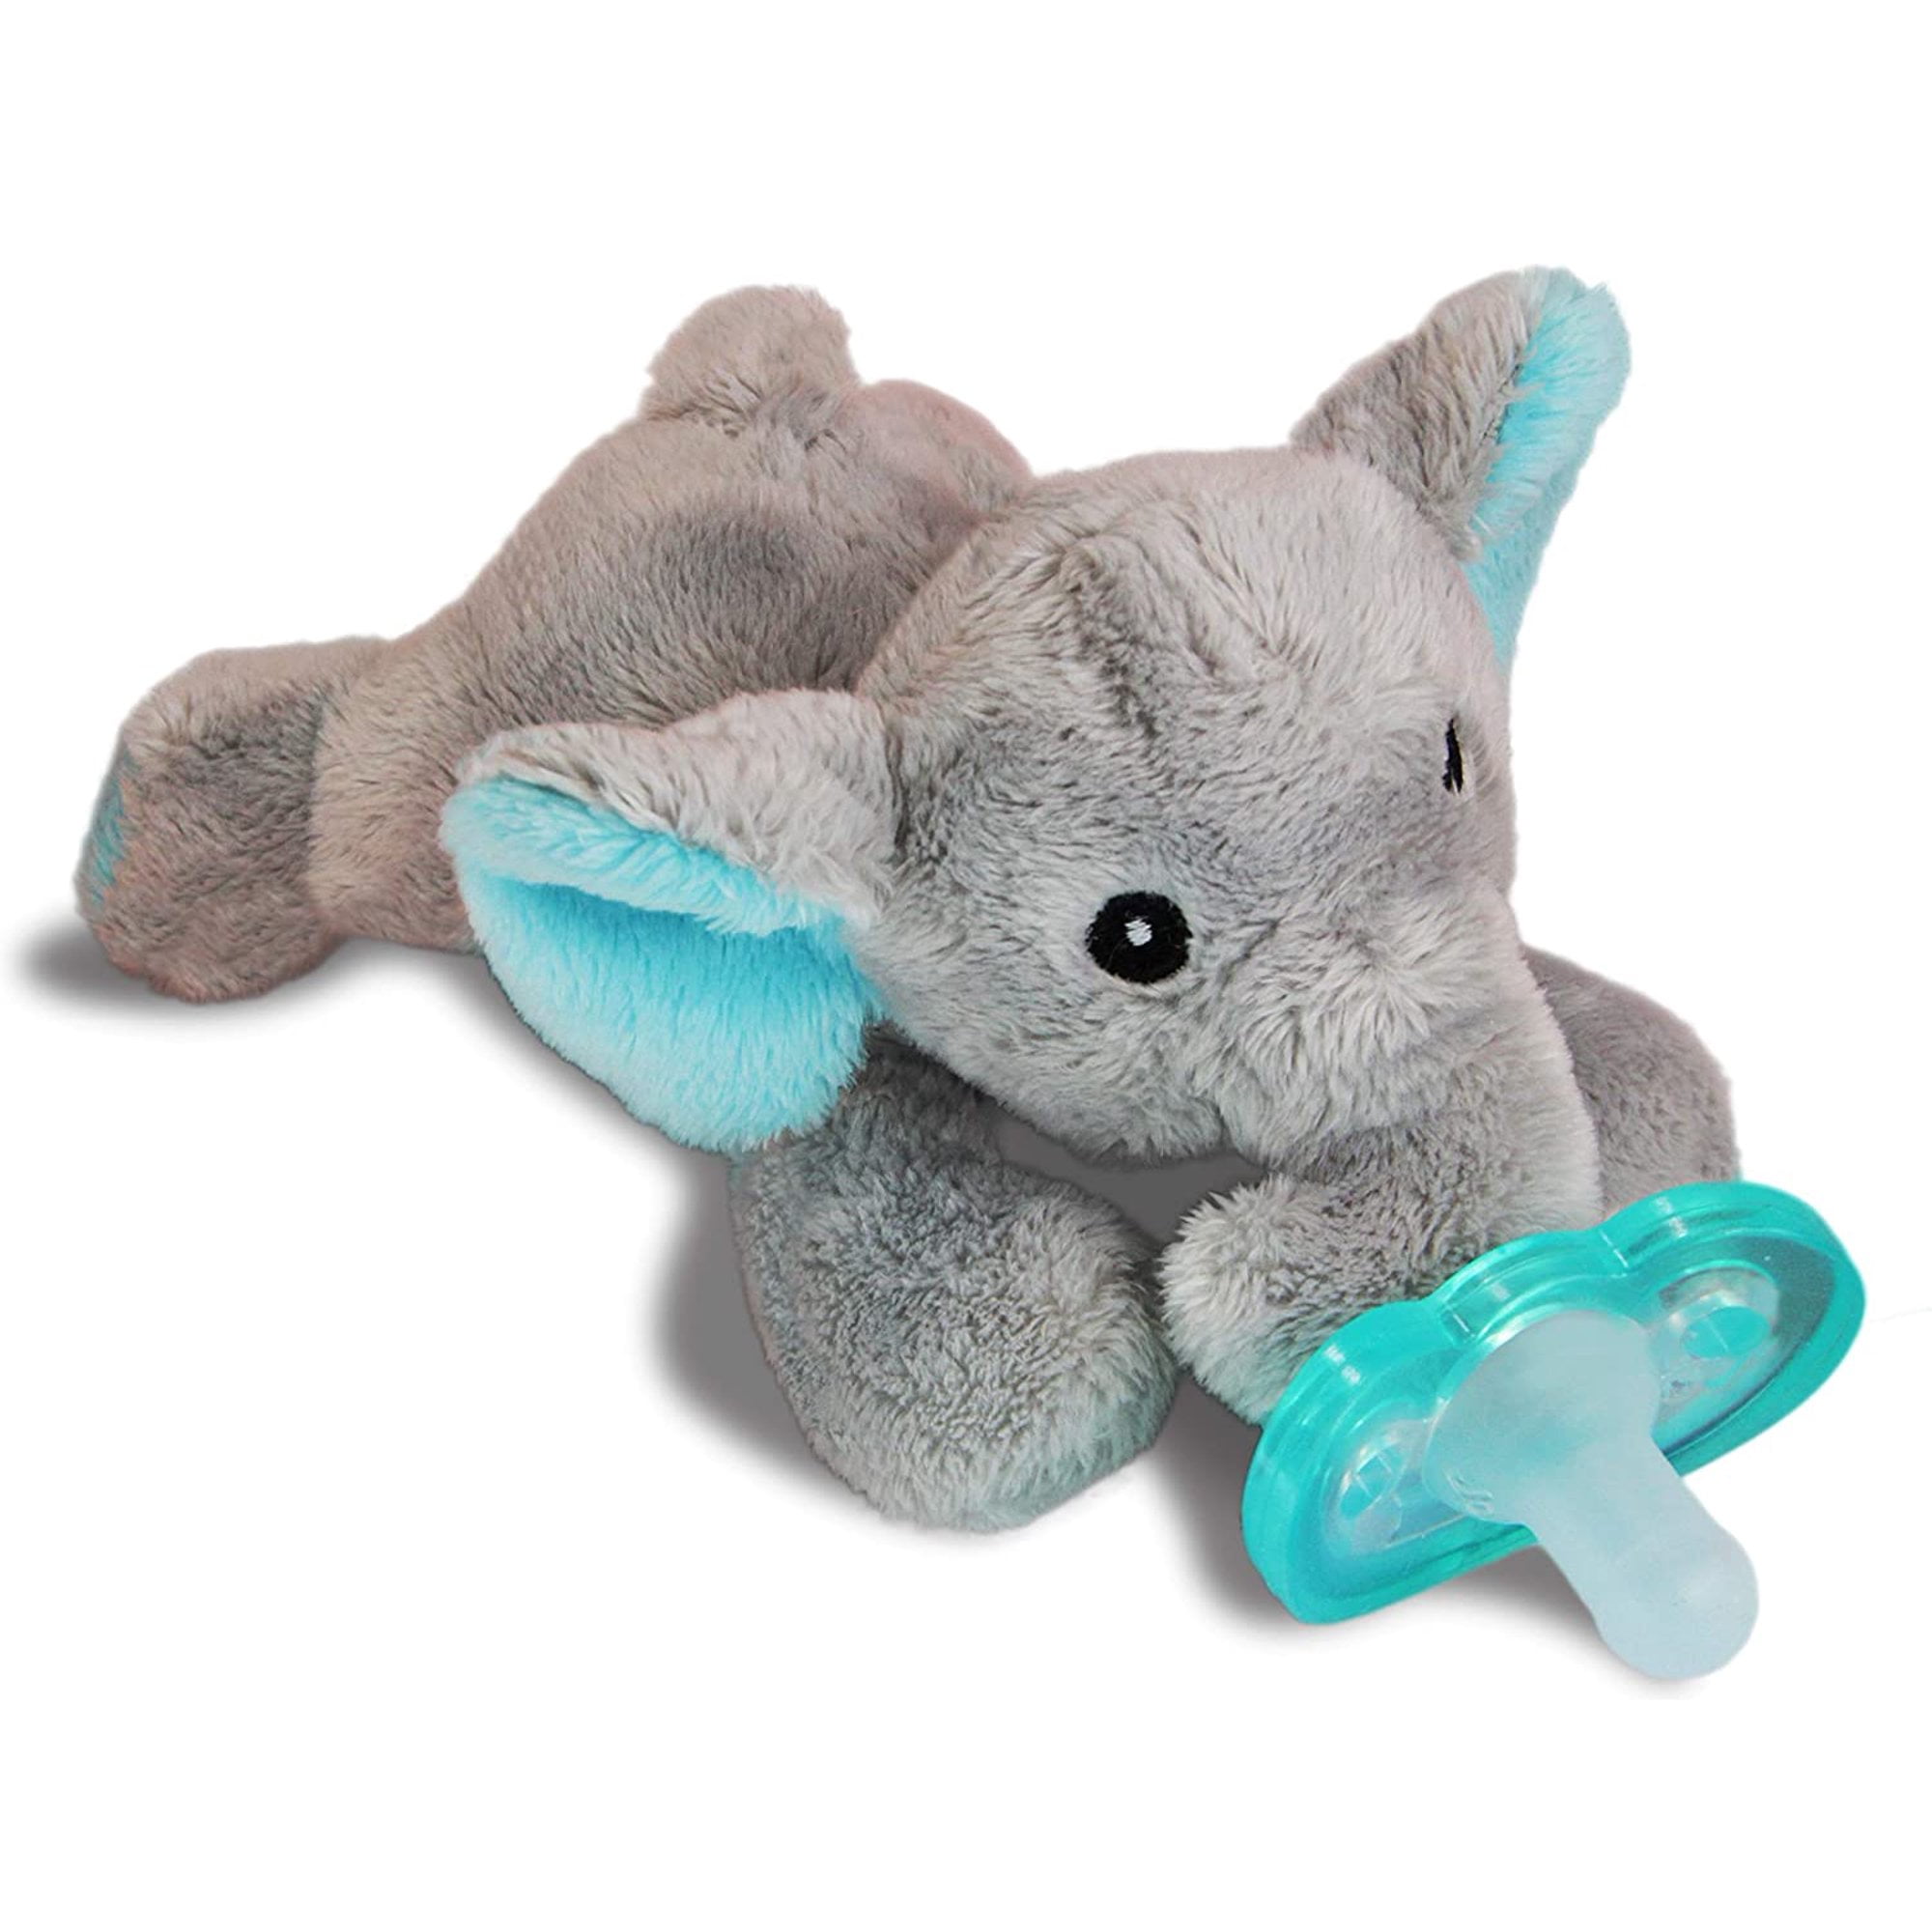 RaZbaby RaZbuddy Paci Holder - Detachable JollyPop Pacifier 0m+ - Elephant - Bpa Free - Pacifier Made in USA